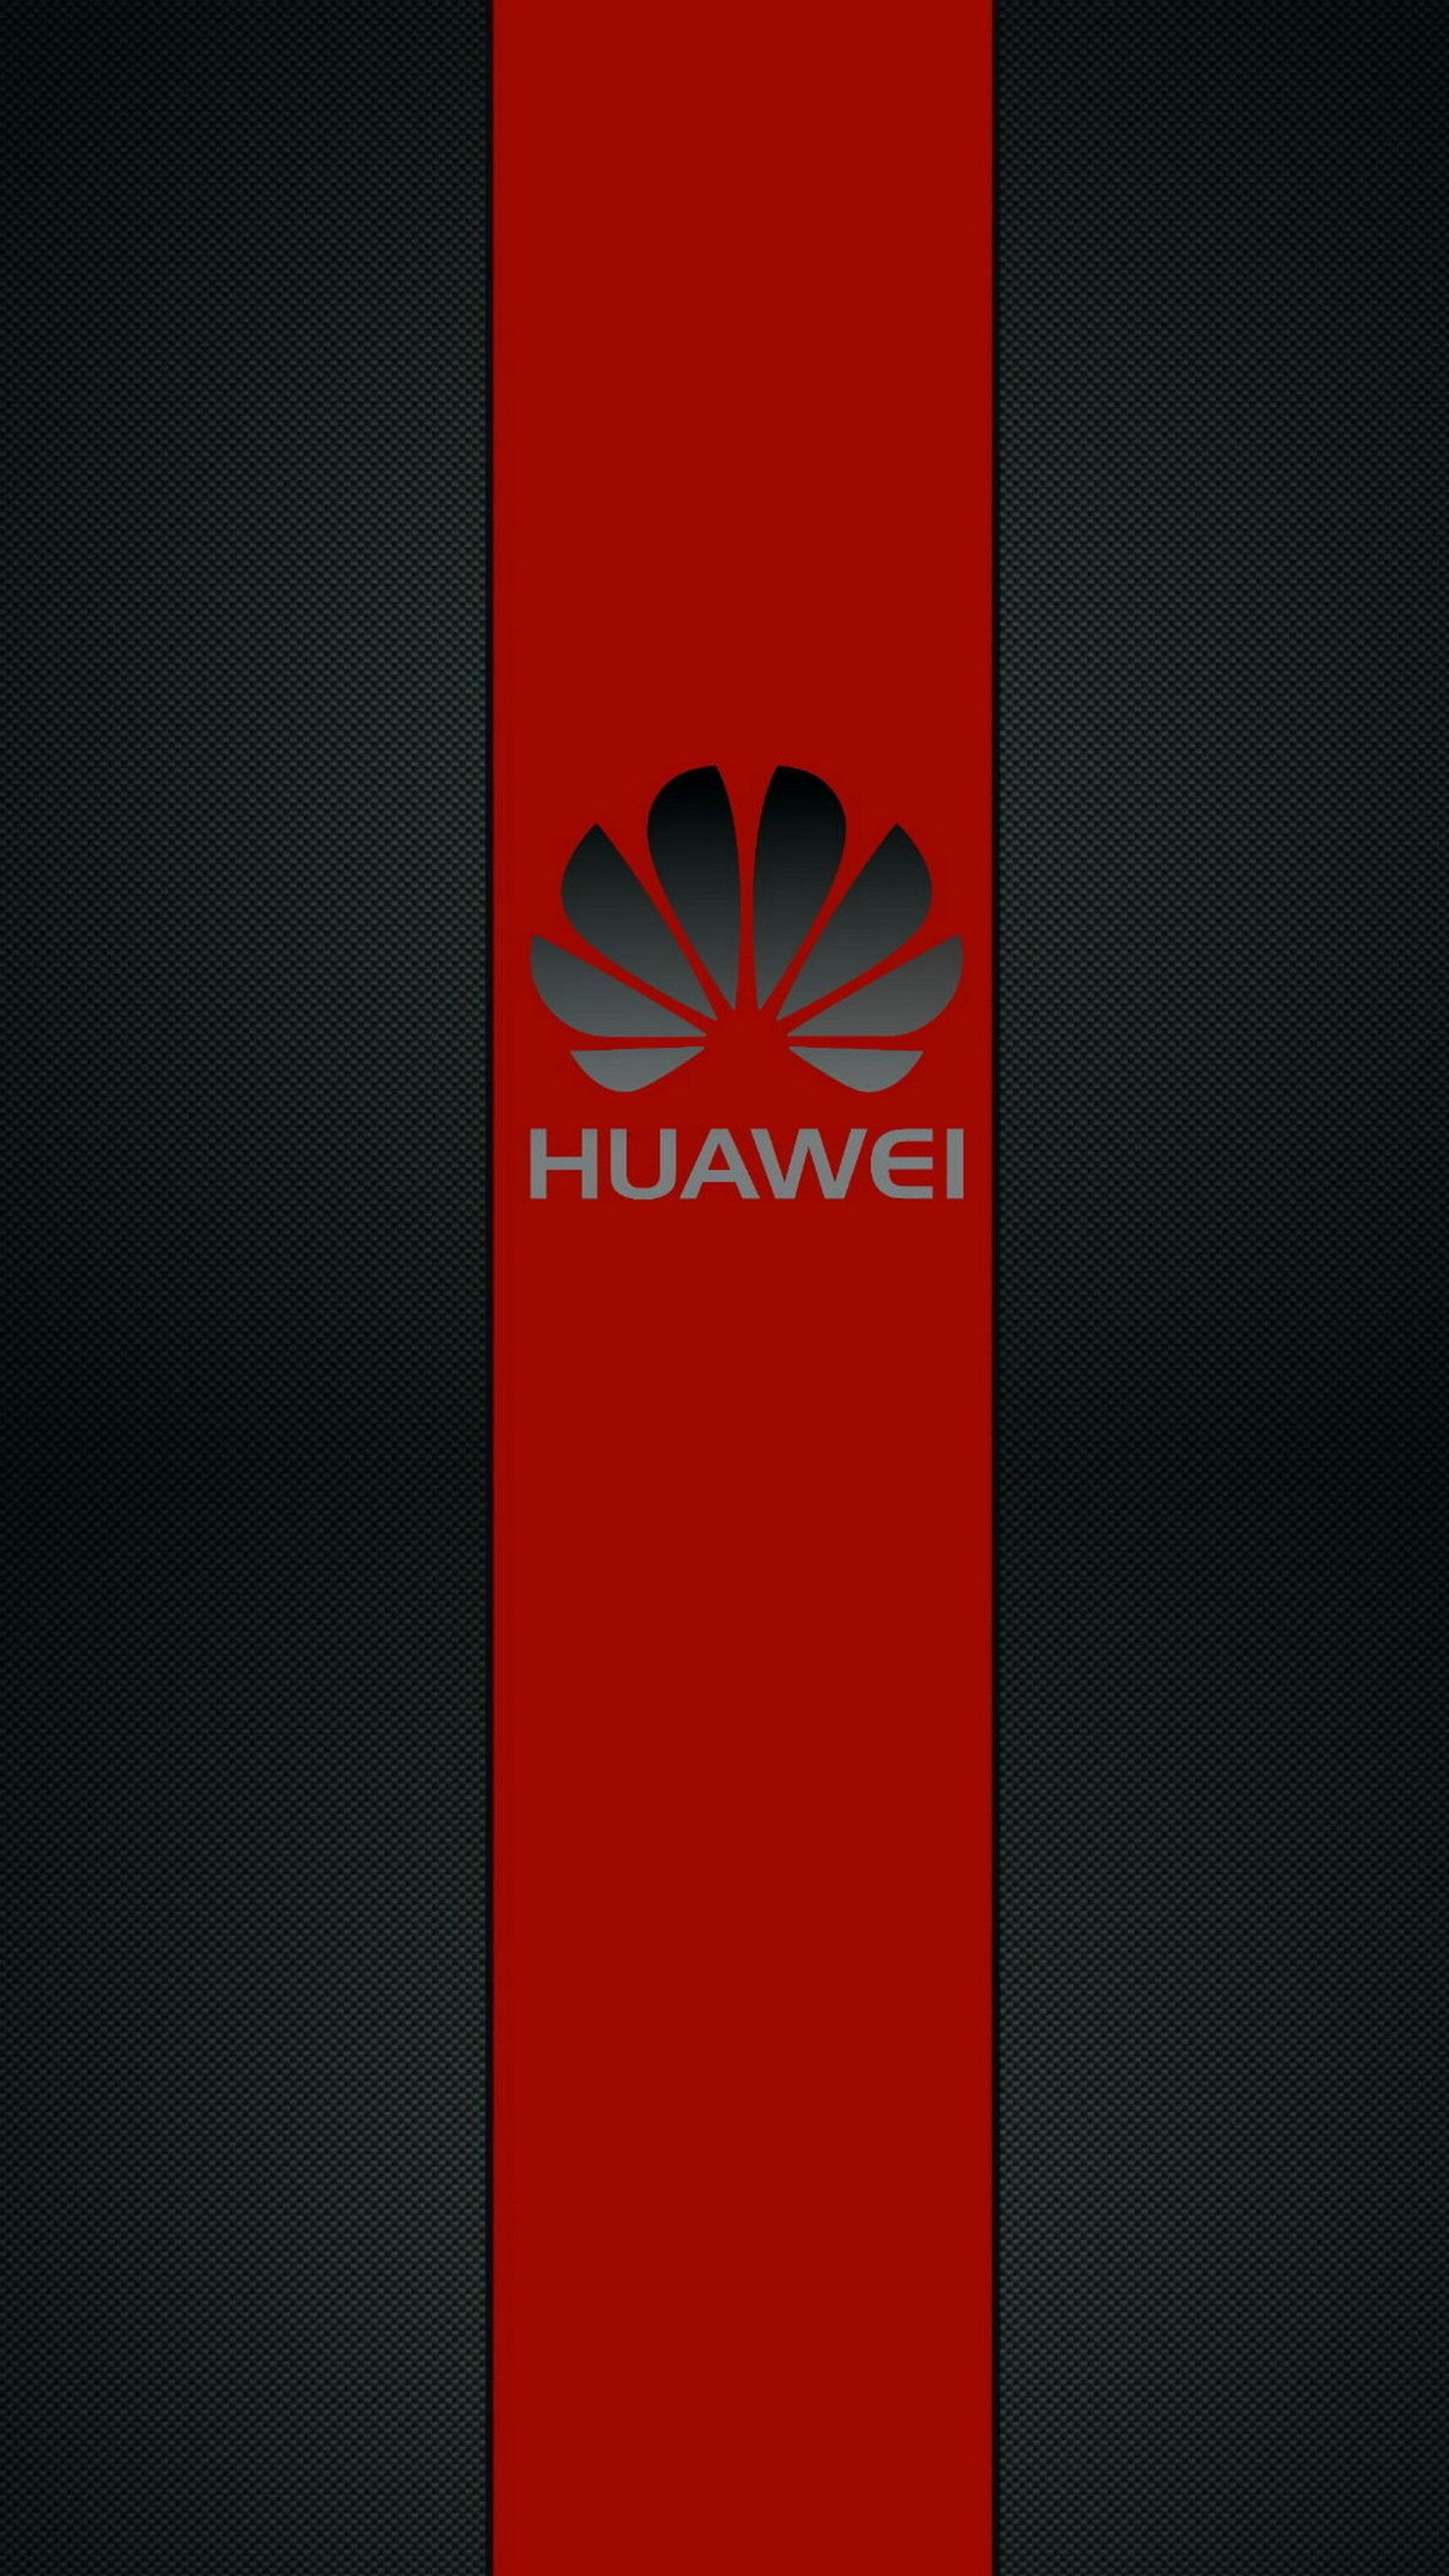 HUAWEI Logo, Android wallpapers, Christian wallpapers, Smartphone backgrounds, 1760x3120 HD Handy